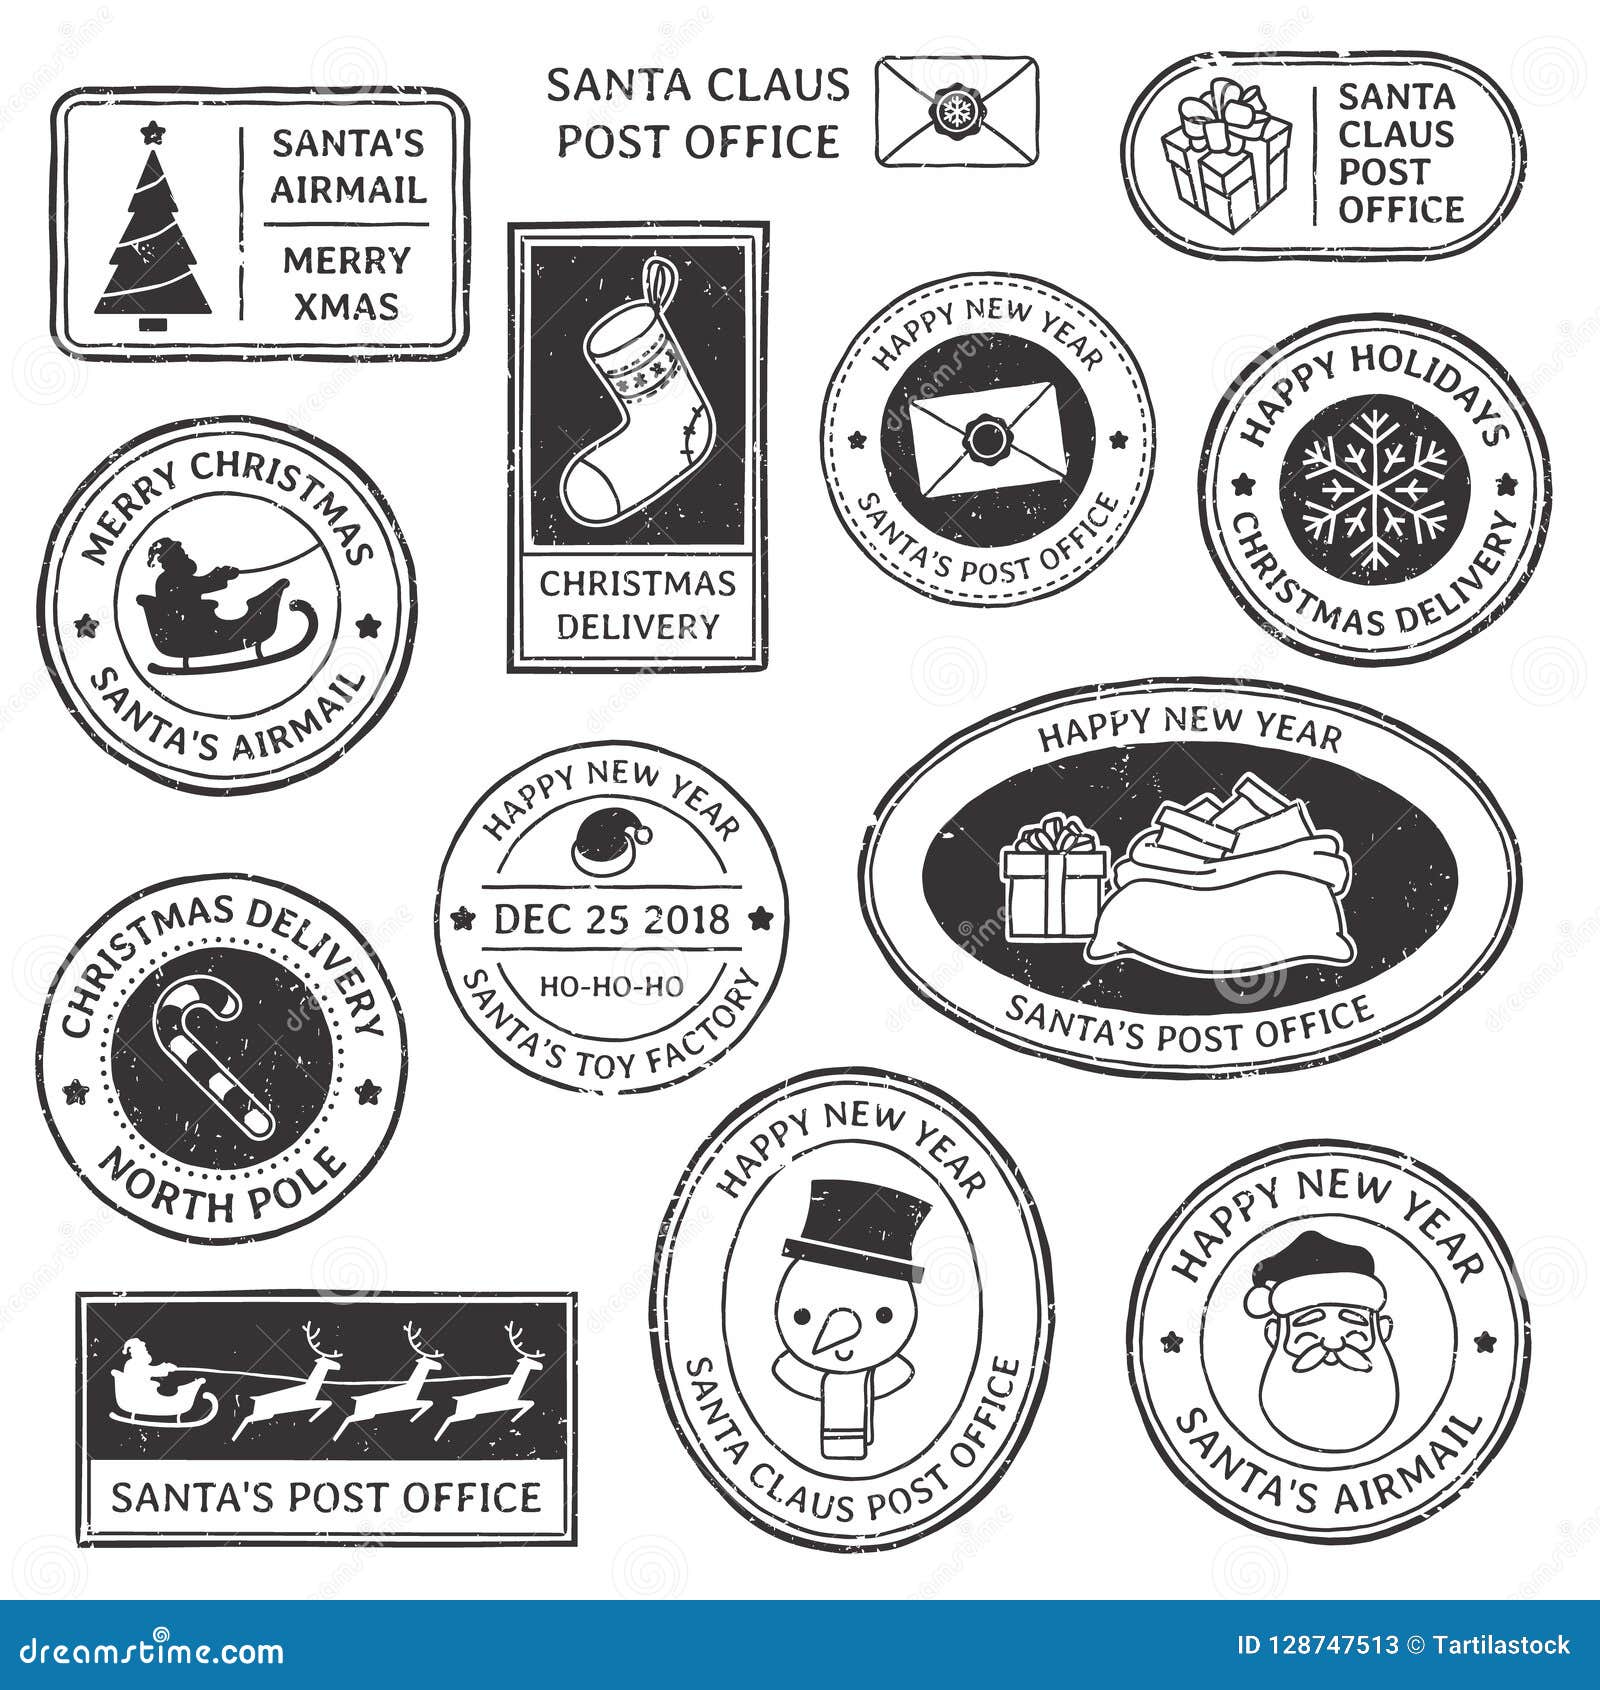 christmas stamp. vintage santa claus postmark, north pole mail cachet and snowflake  on stamps  